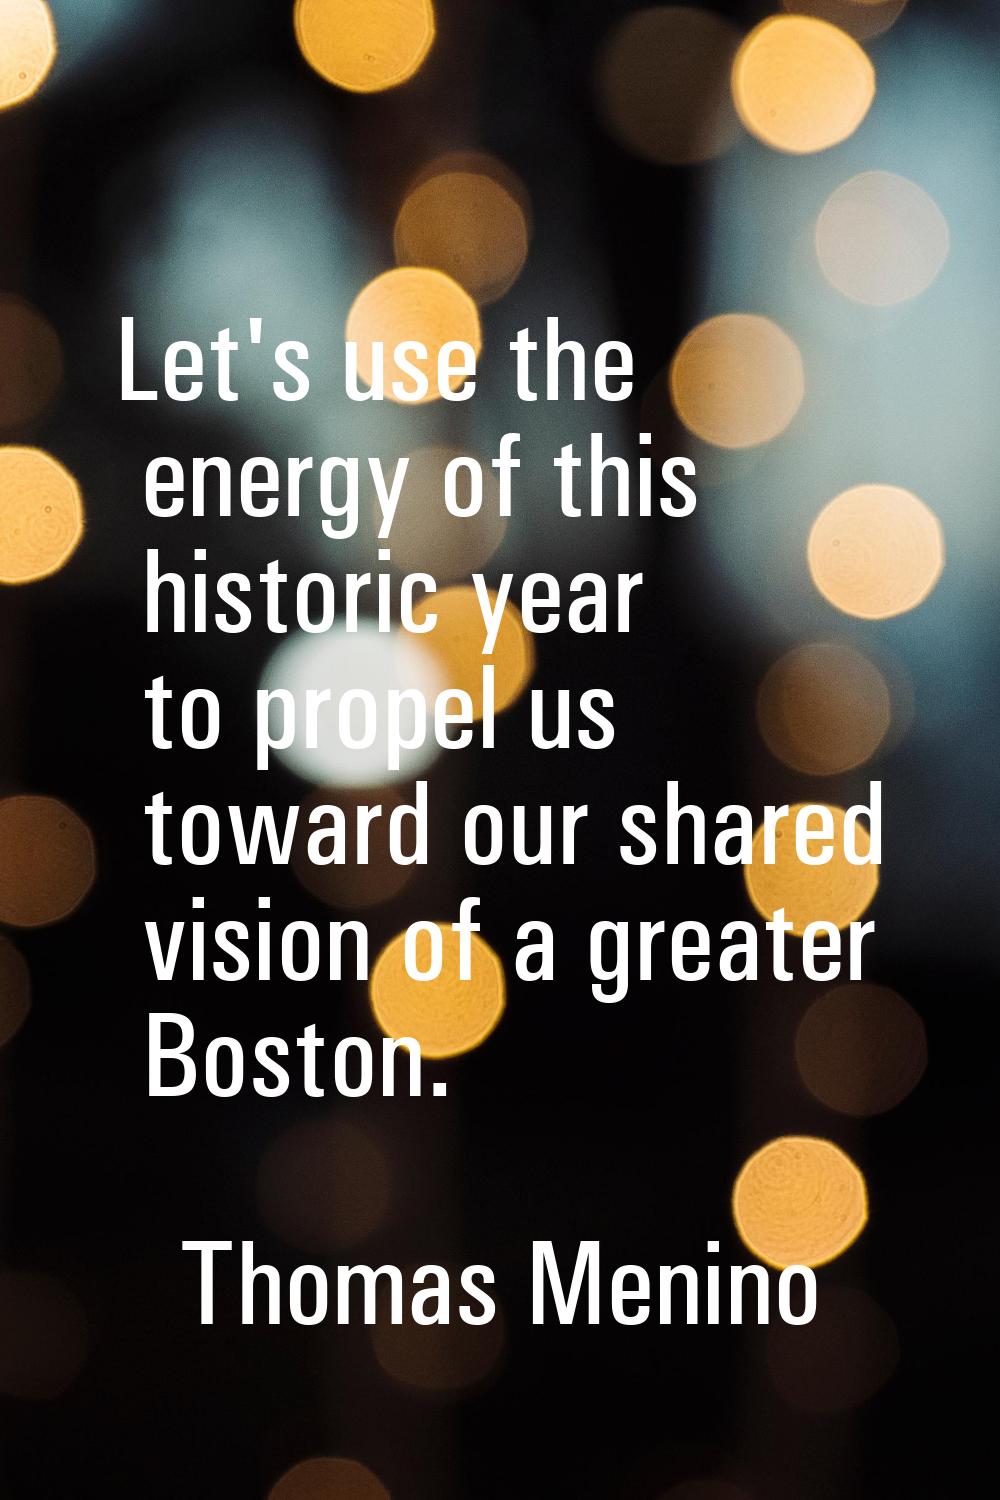 Let's use the energy of this historic year to propel us toward our shared vision of a greater Bosto